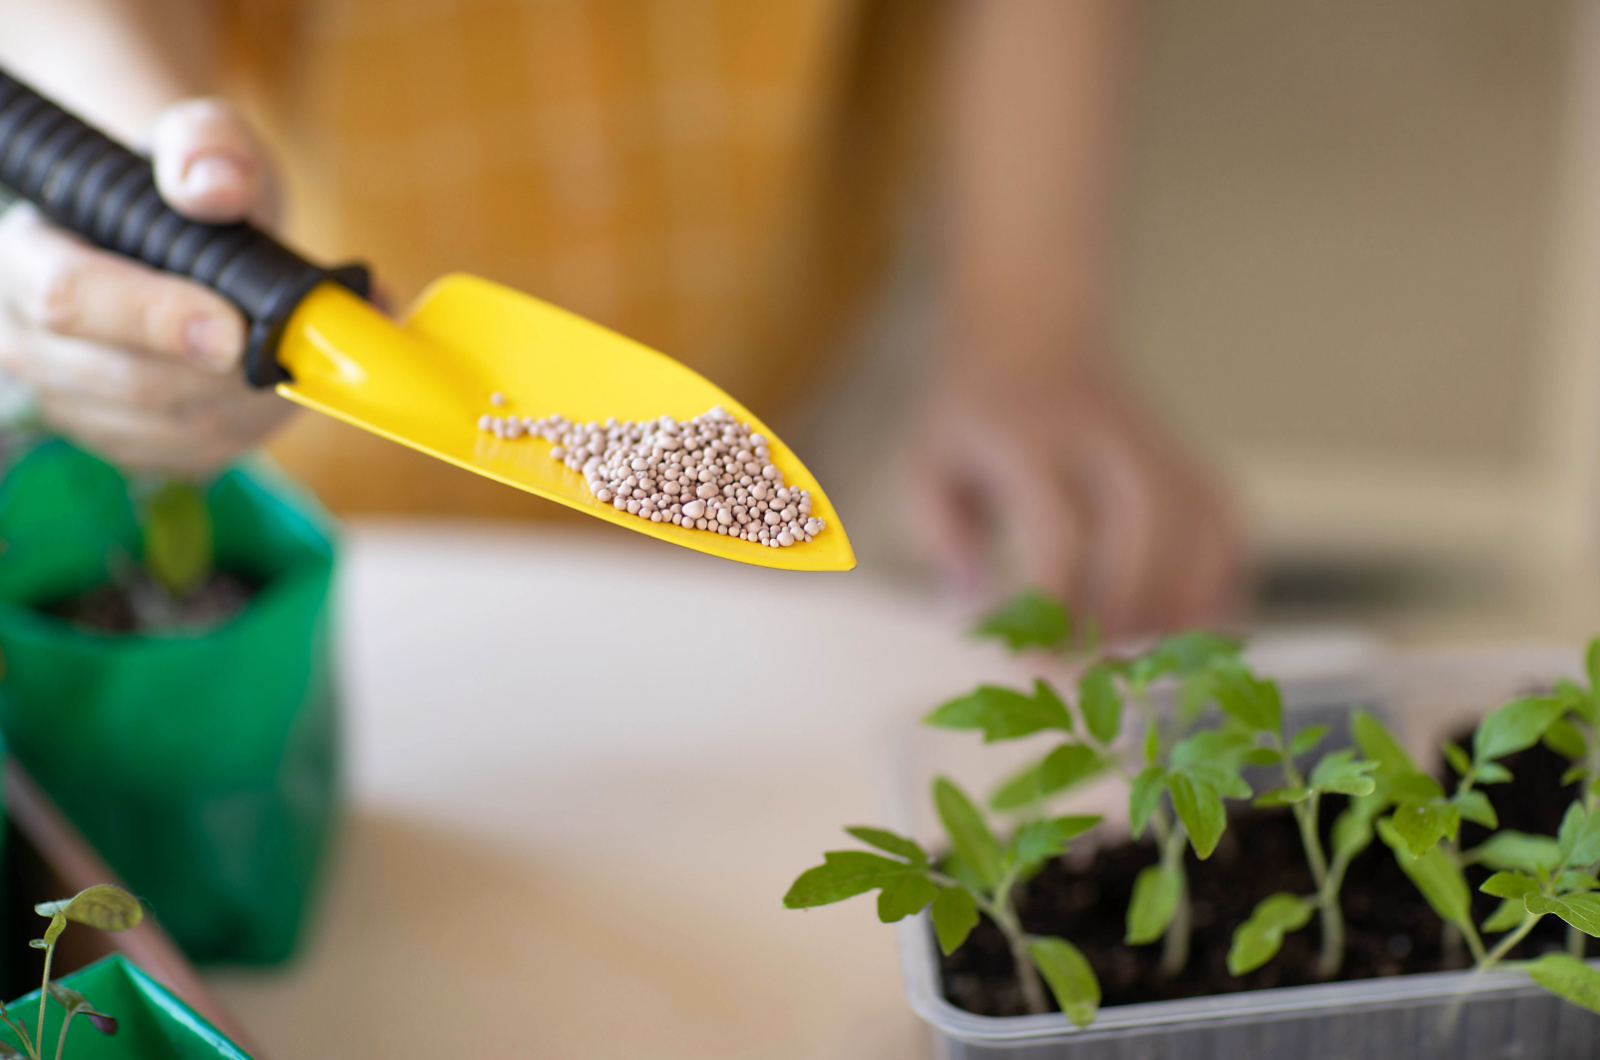 fertilizer for tomatoes seedlings on a yellow spatula